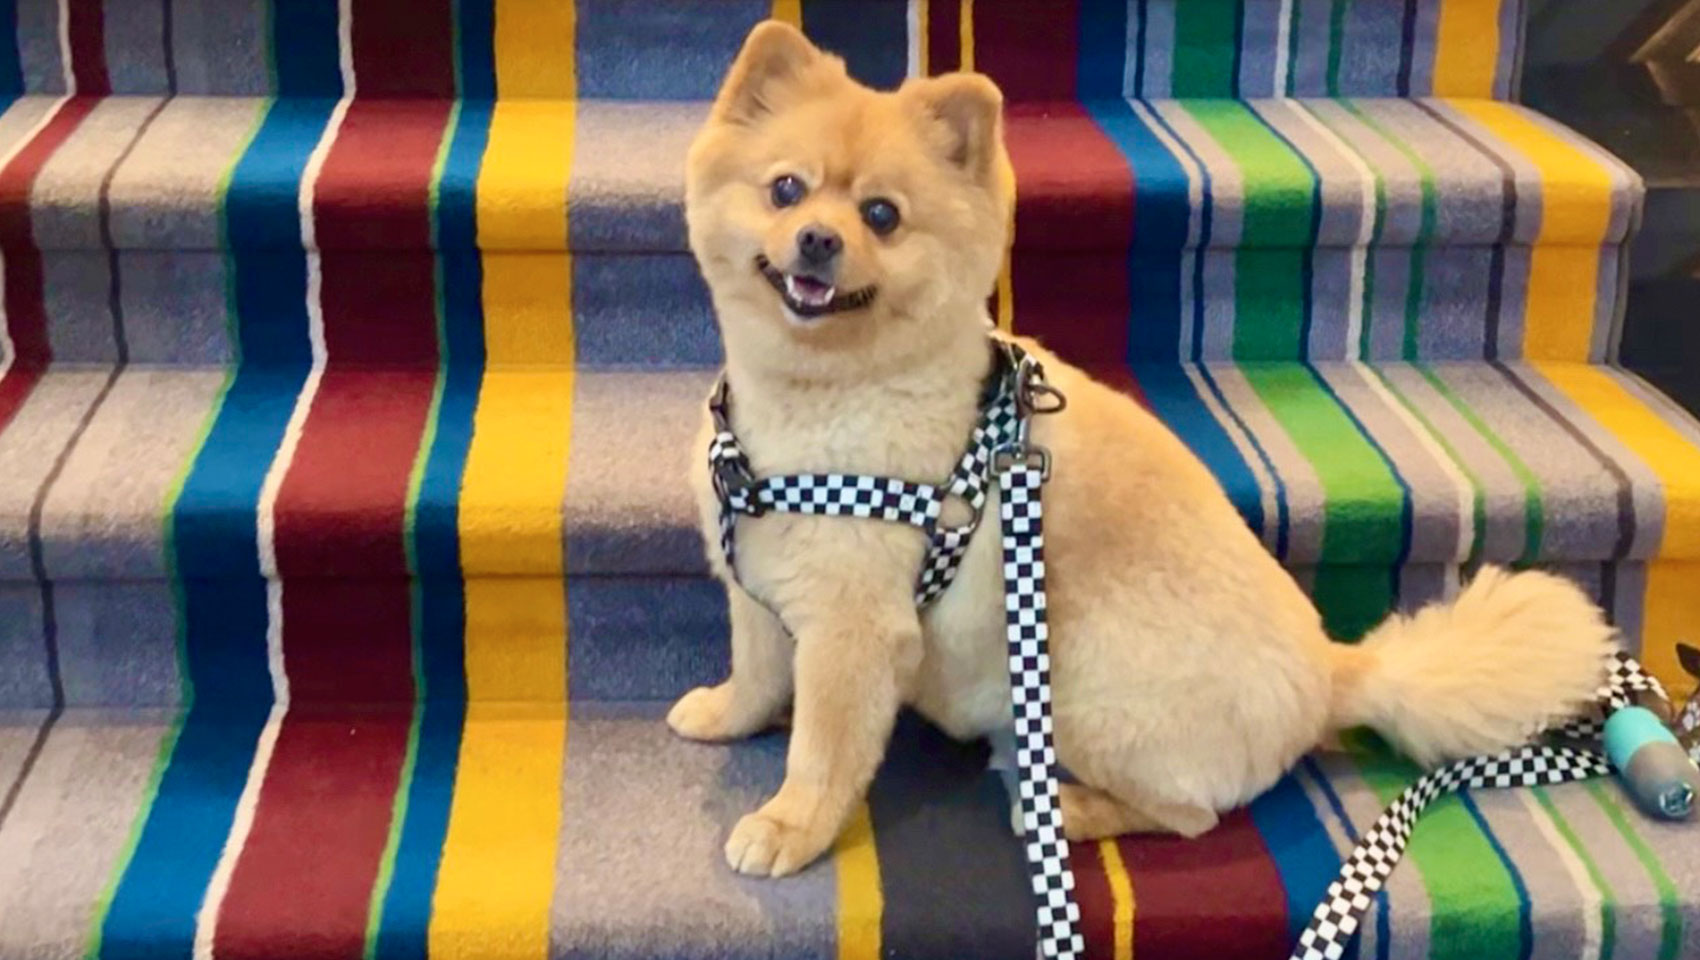 Image of pomeranian dog on colorful striped stairs